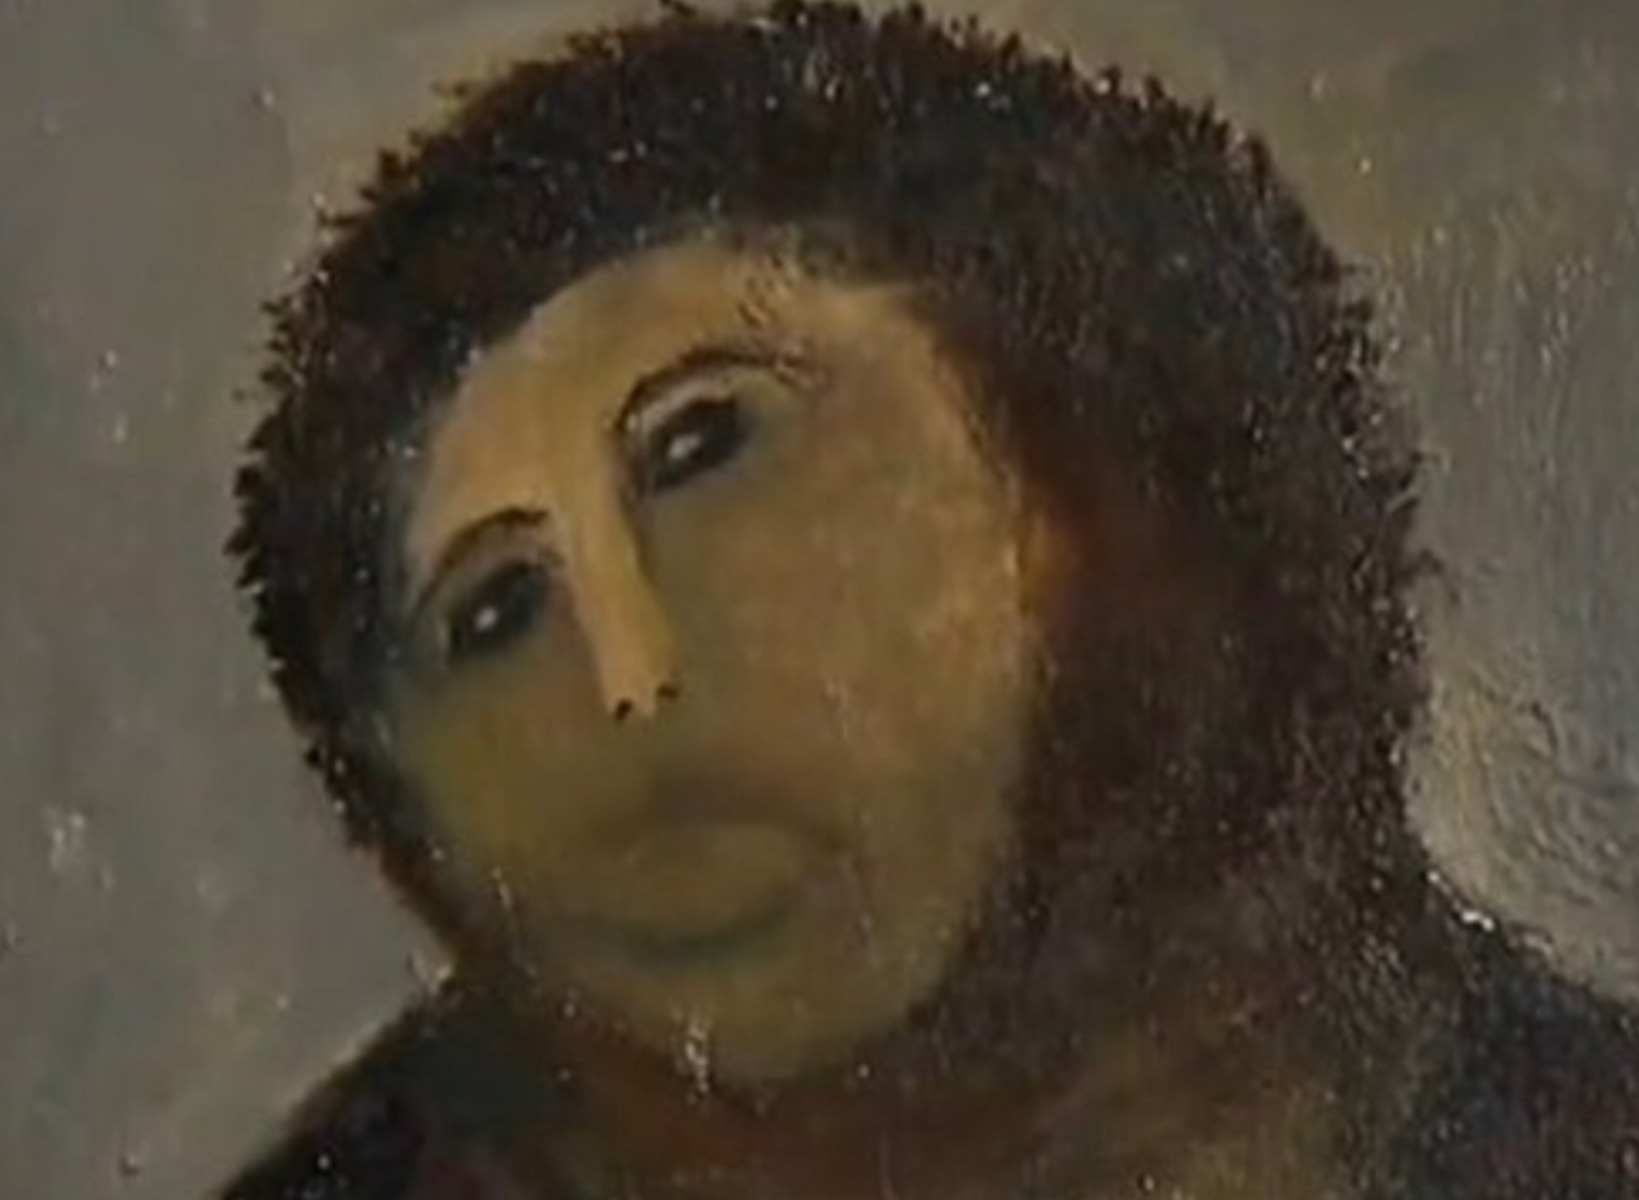 The famously bodged Jesus painting from a few years ago